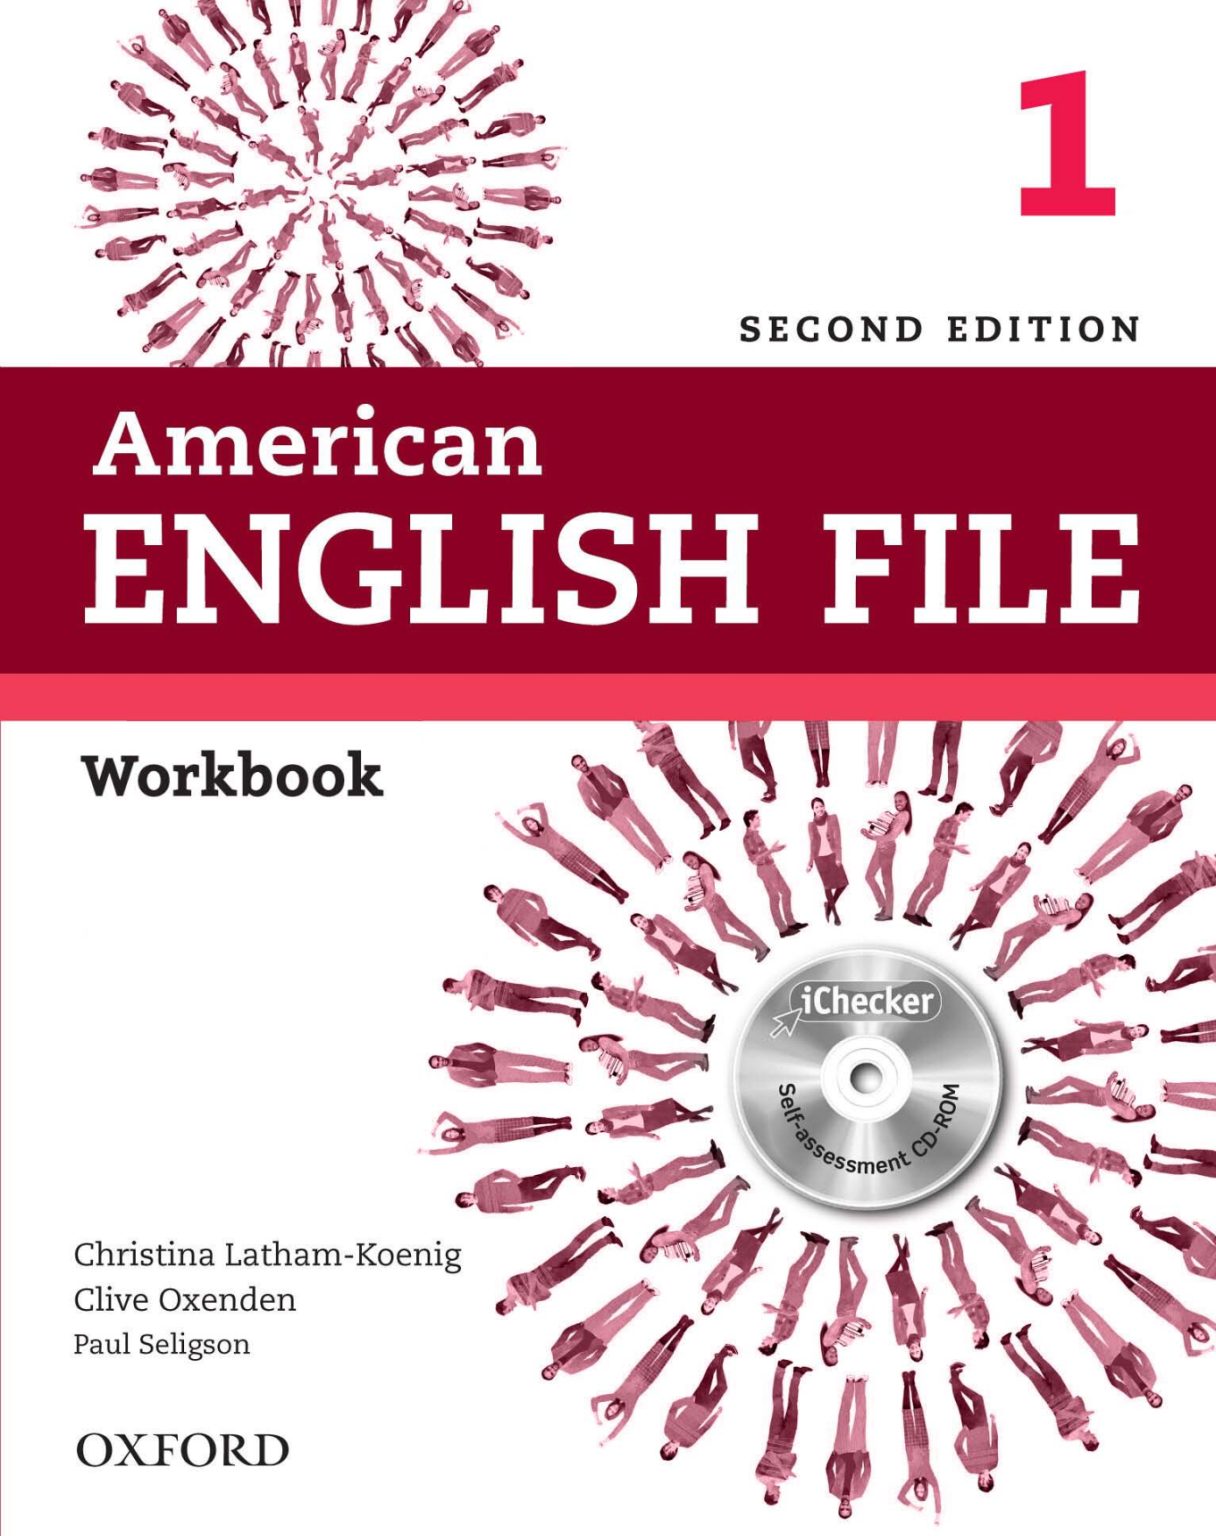 american-english-workbook-archives-pdf-library